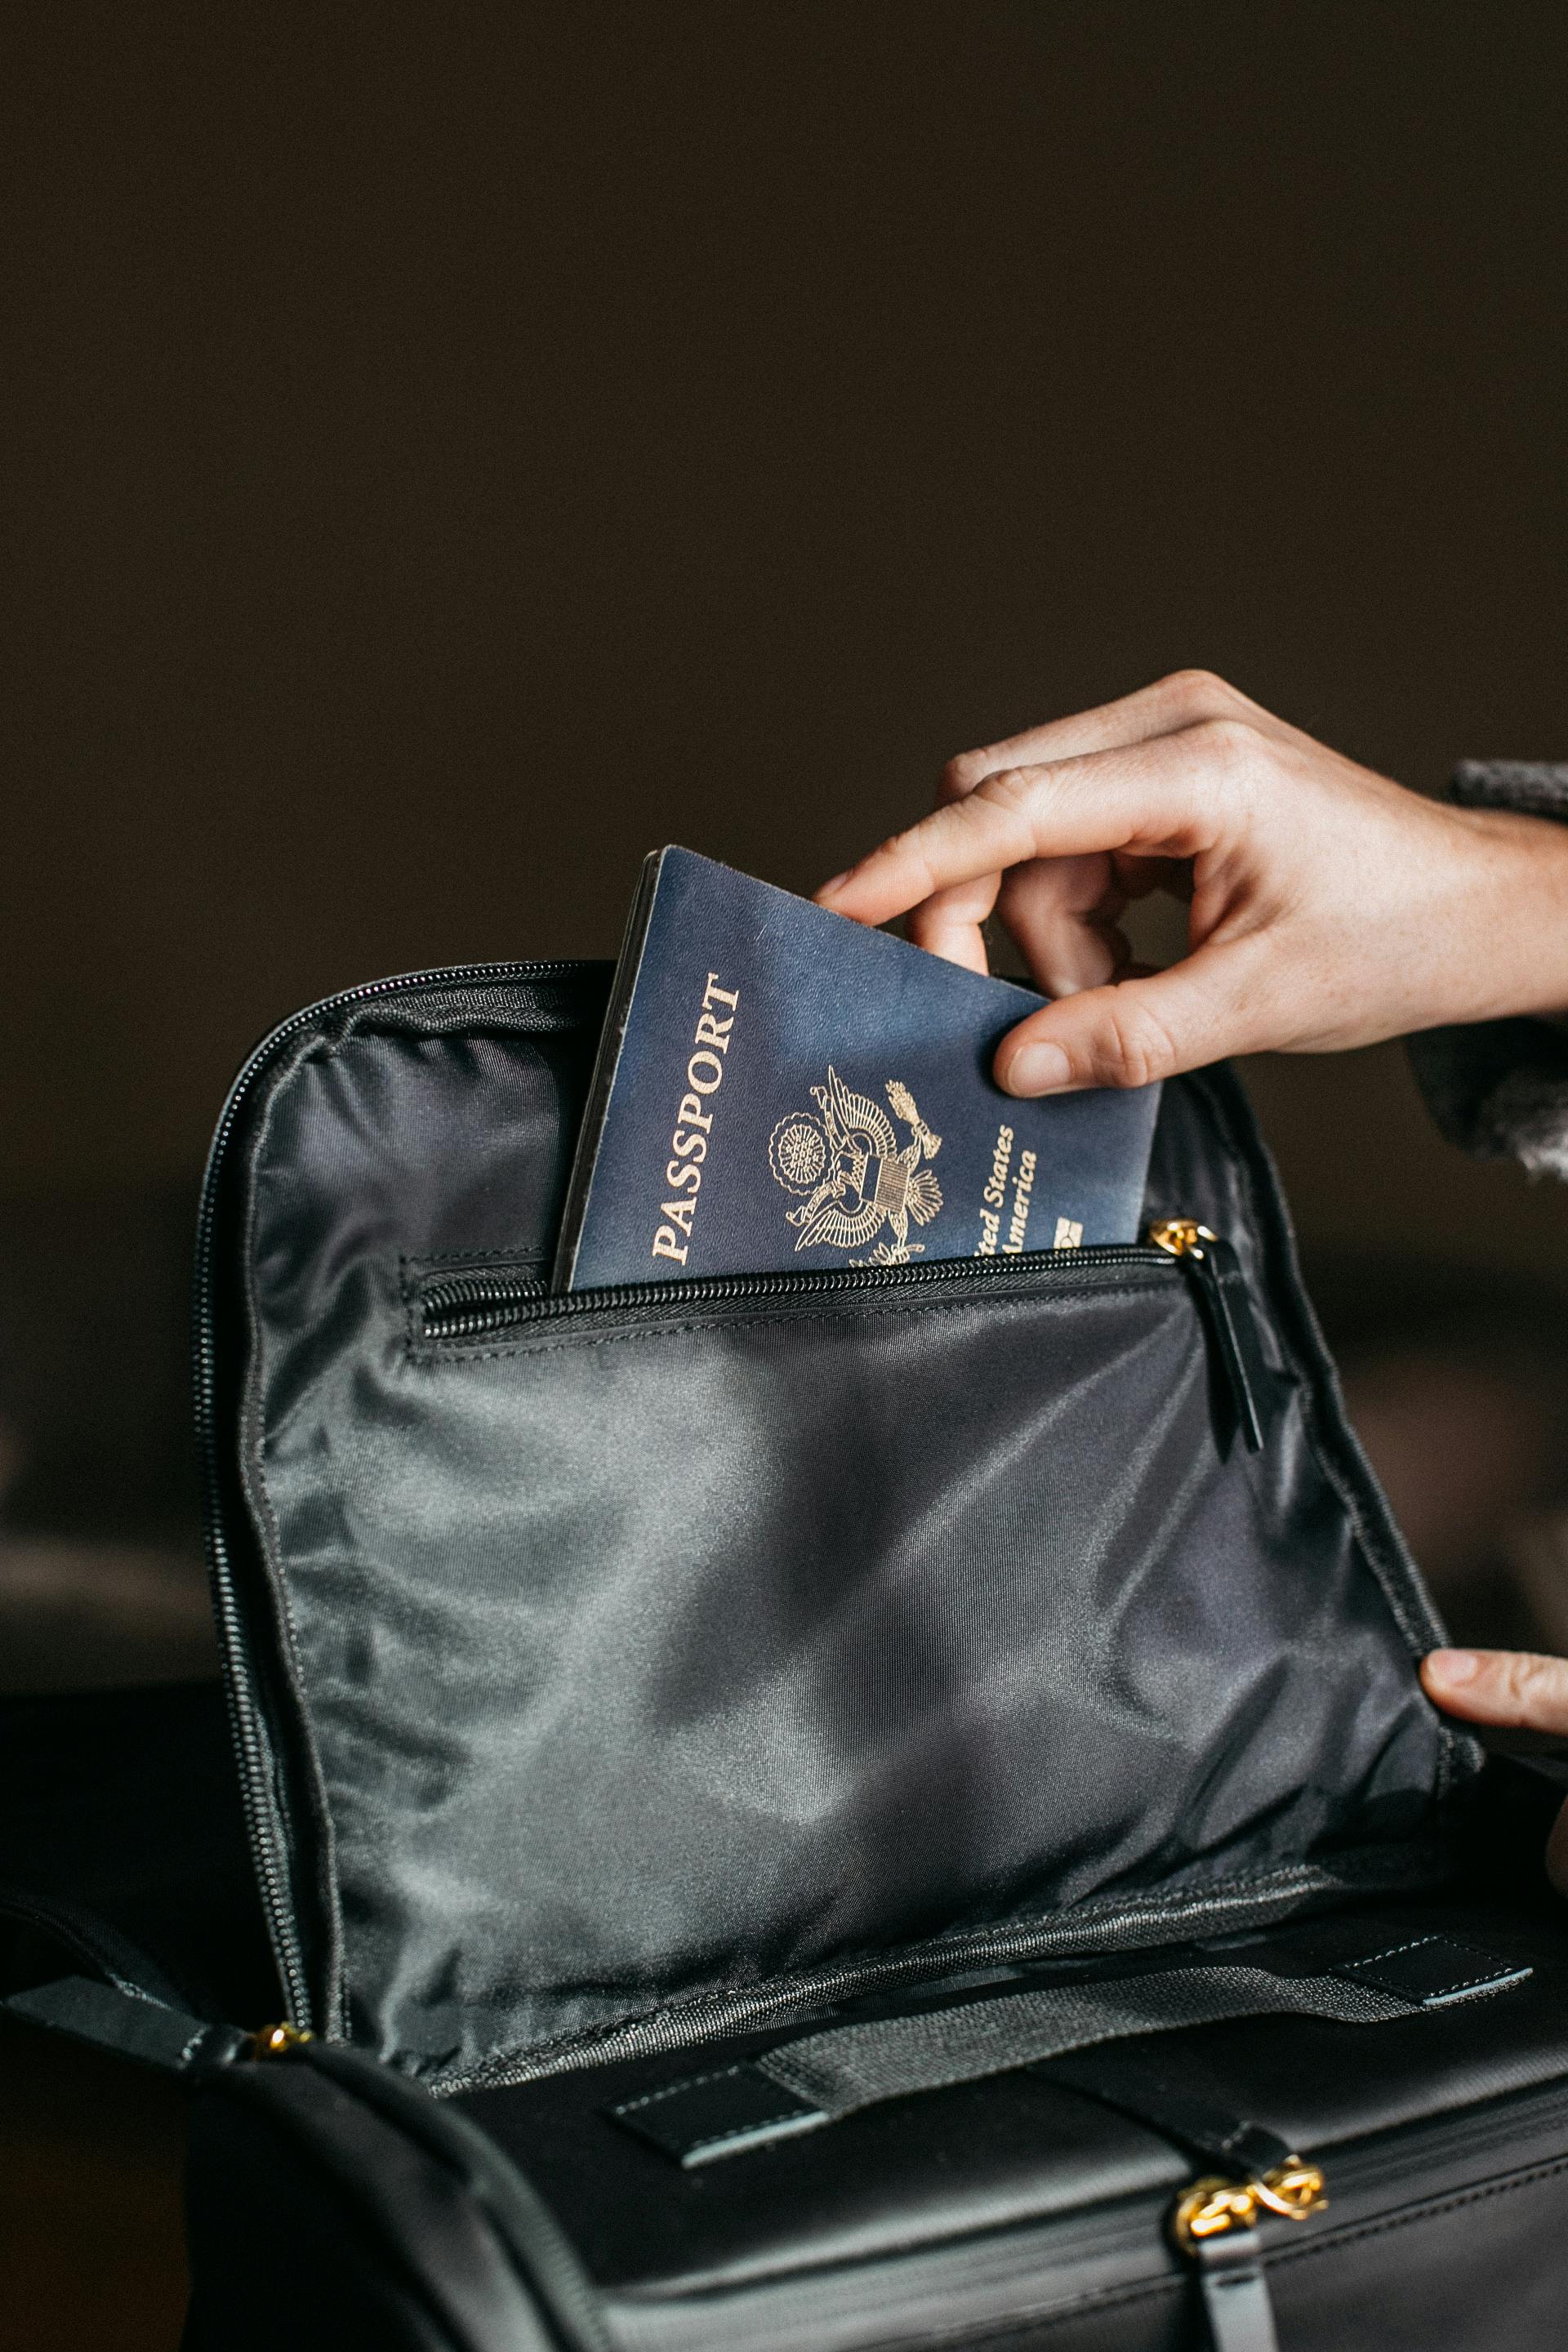 person putting passport in a bag